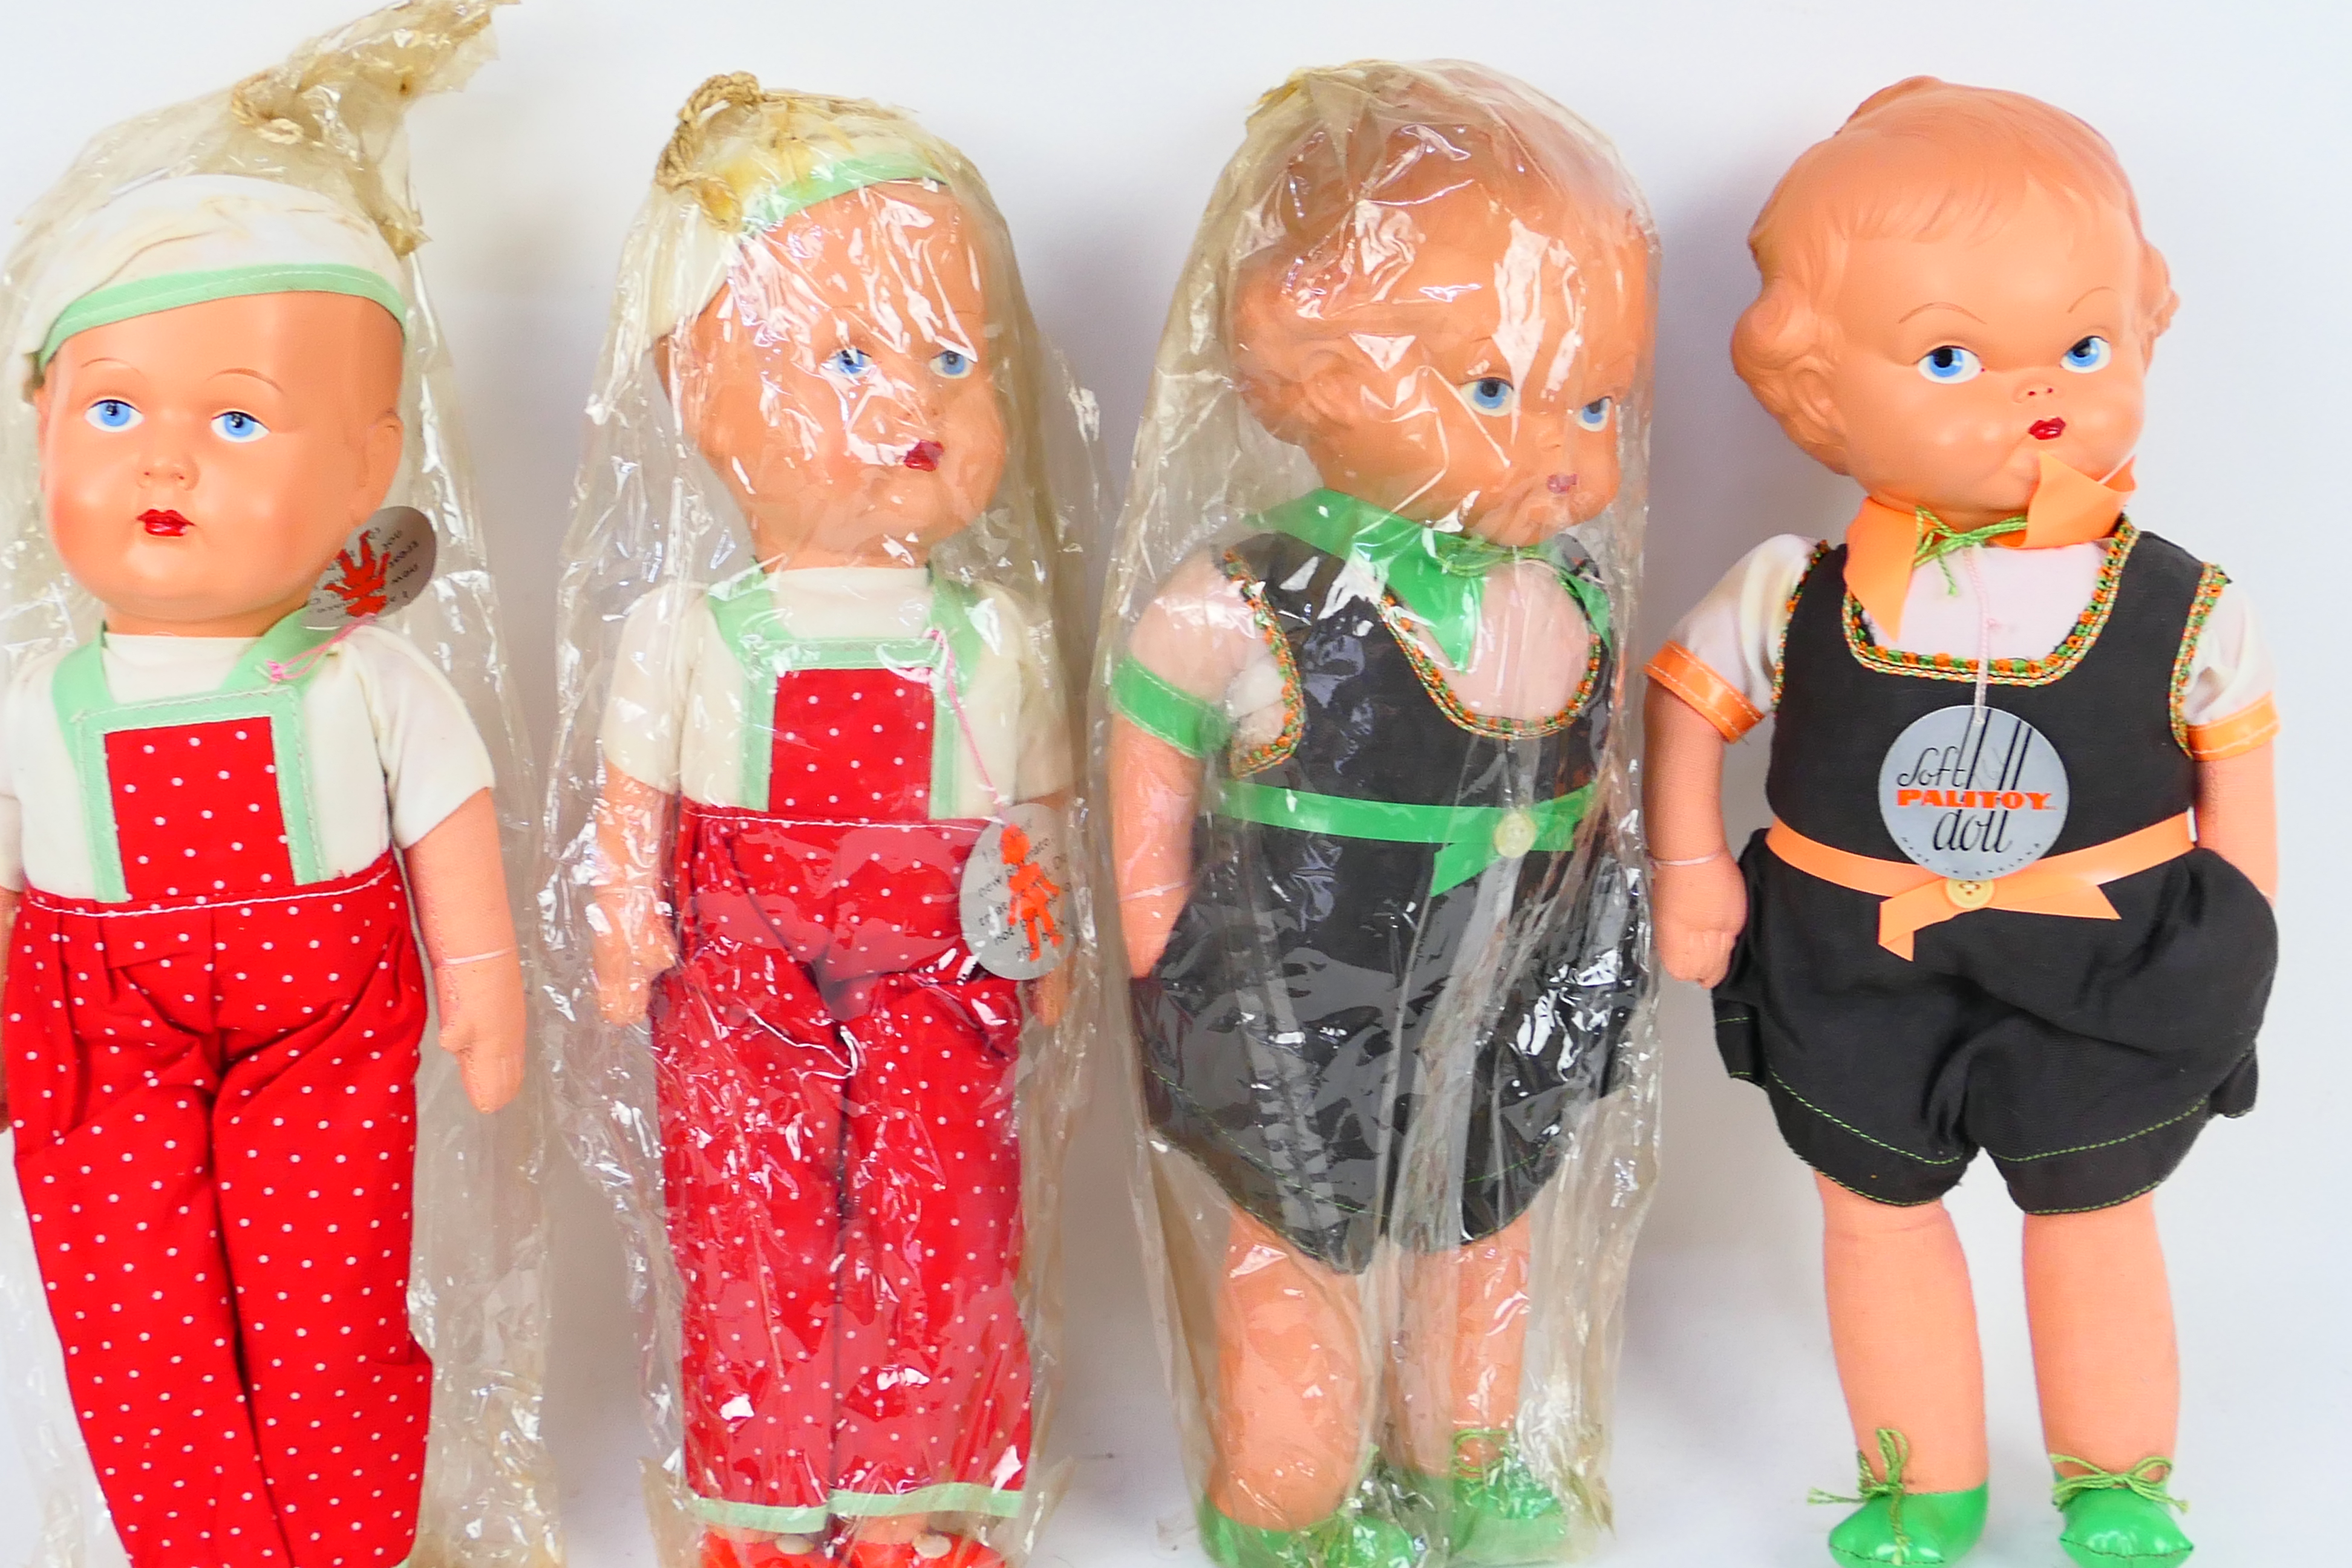 Palitoy - Four bagged Palitoy Soft Dolls. Lot consists of two 14" boy dolls and two 14" girl dolls. - Image 4 of 4